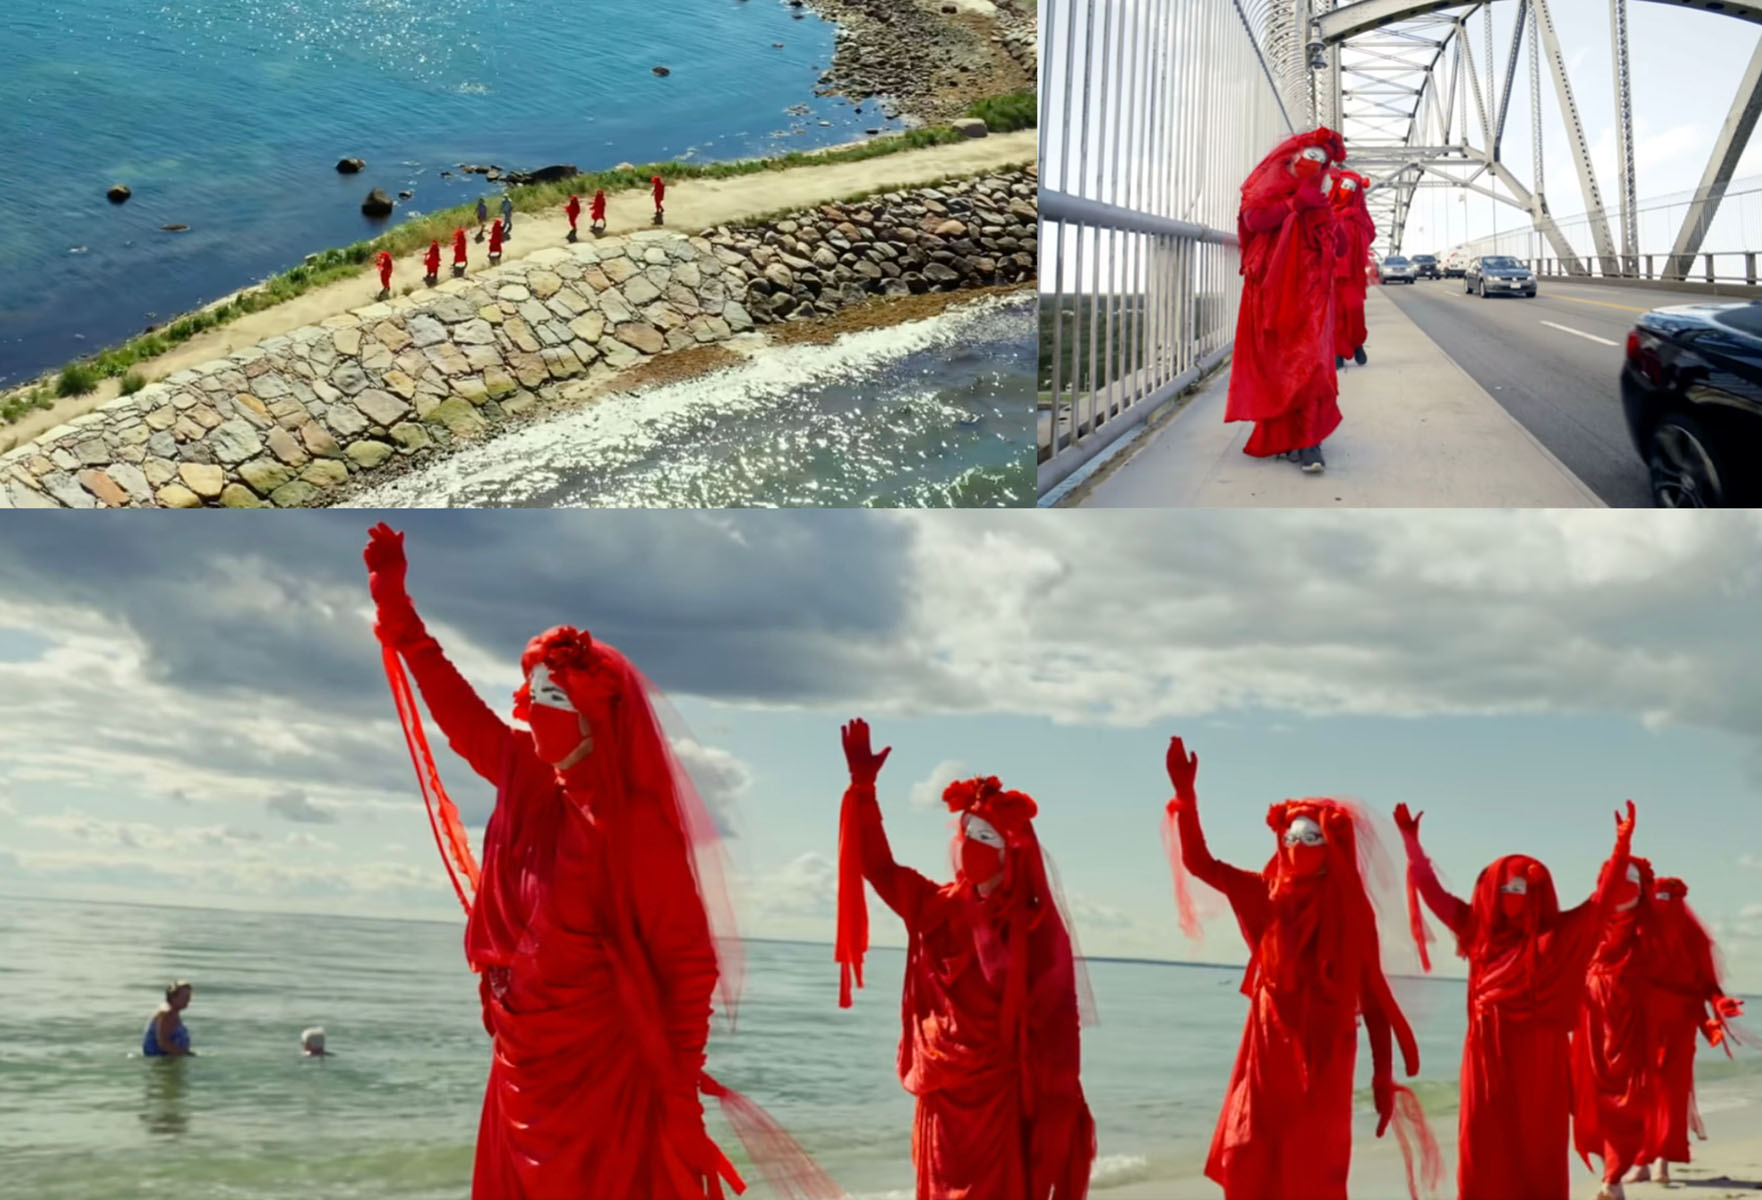 A trio of images showing the Red Rebels: filmed from above, on a bridge, and at a beach.